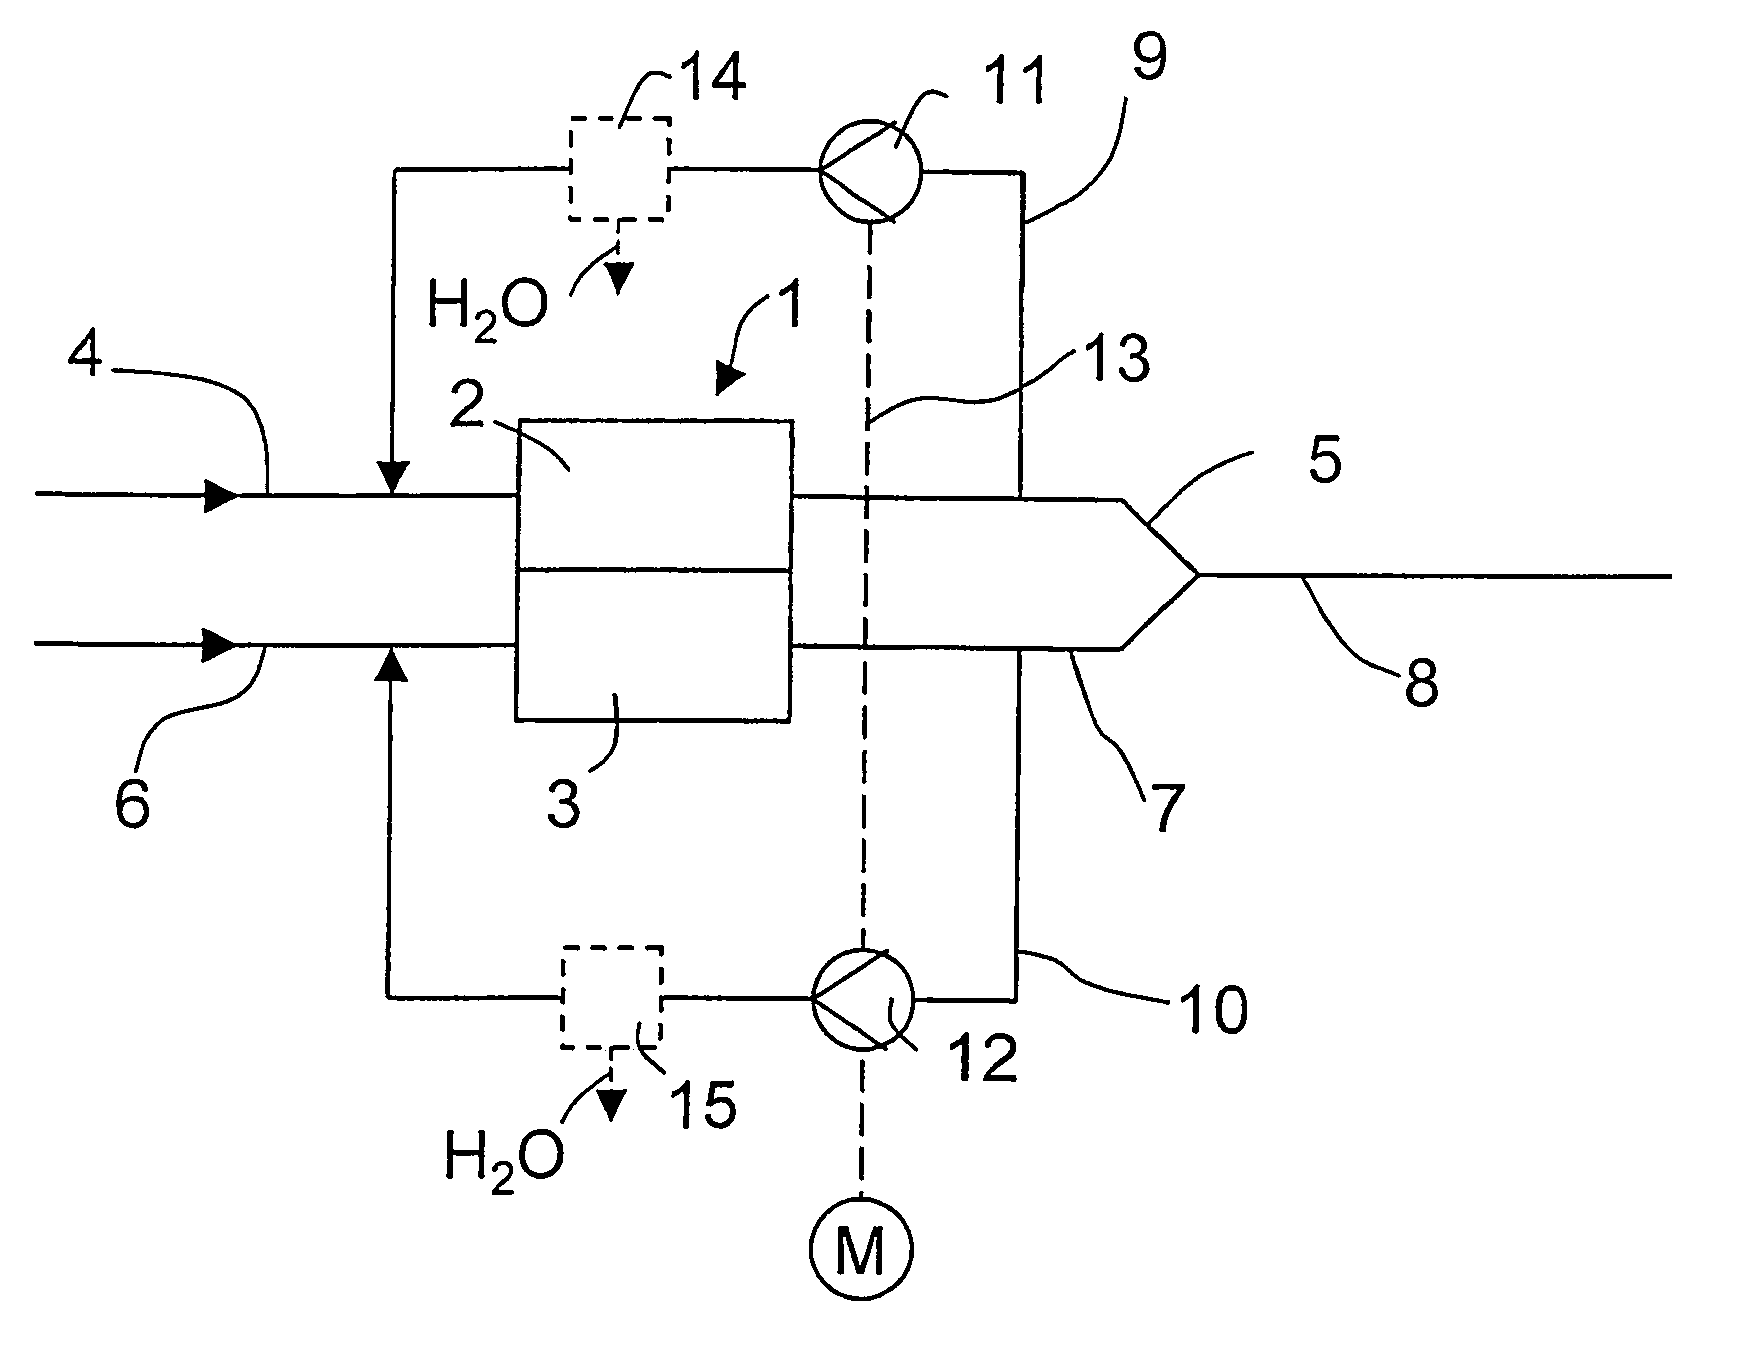 Fuel cell system and method for operating same